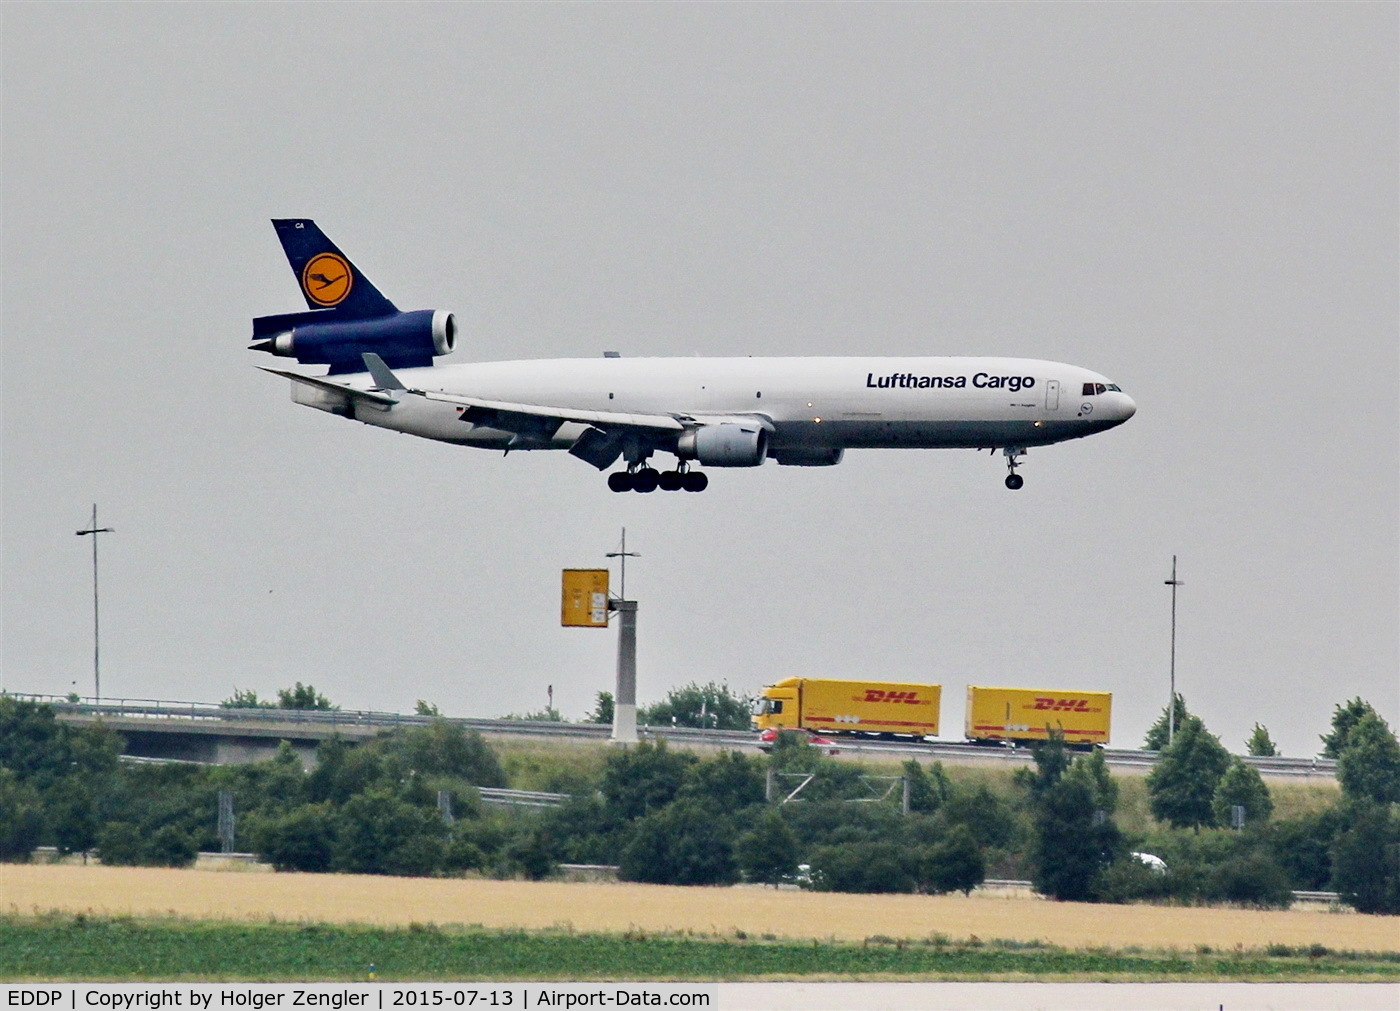 Leipzig/Halle Airport, Leipzig/Halle Germany (EDDP) - Inbound traffic for rwy 26L delivers parcels for yellow trucks company...